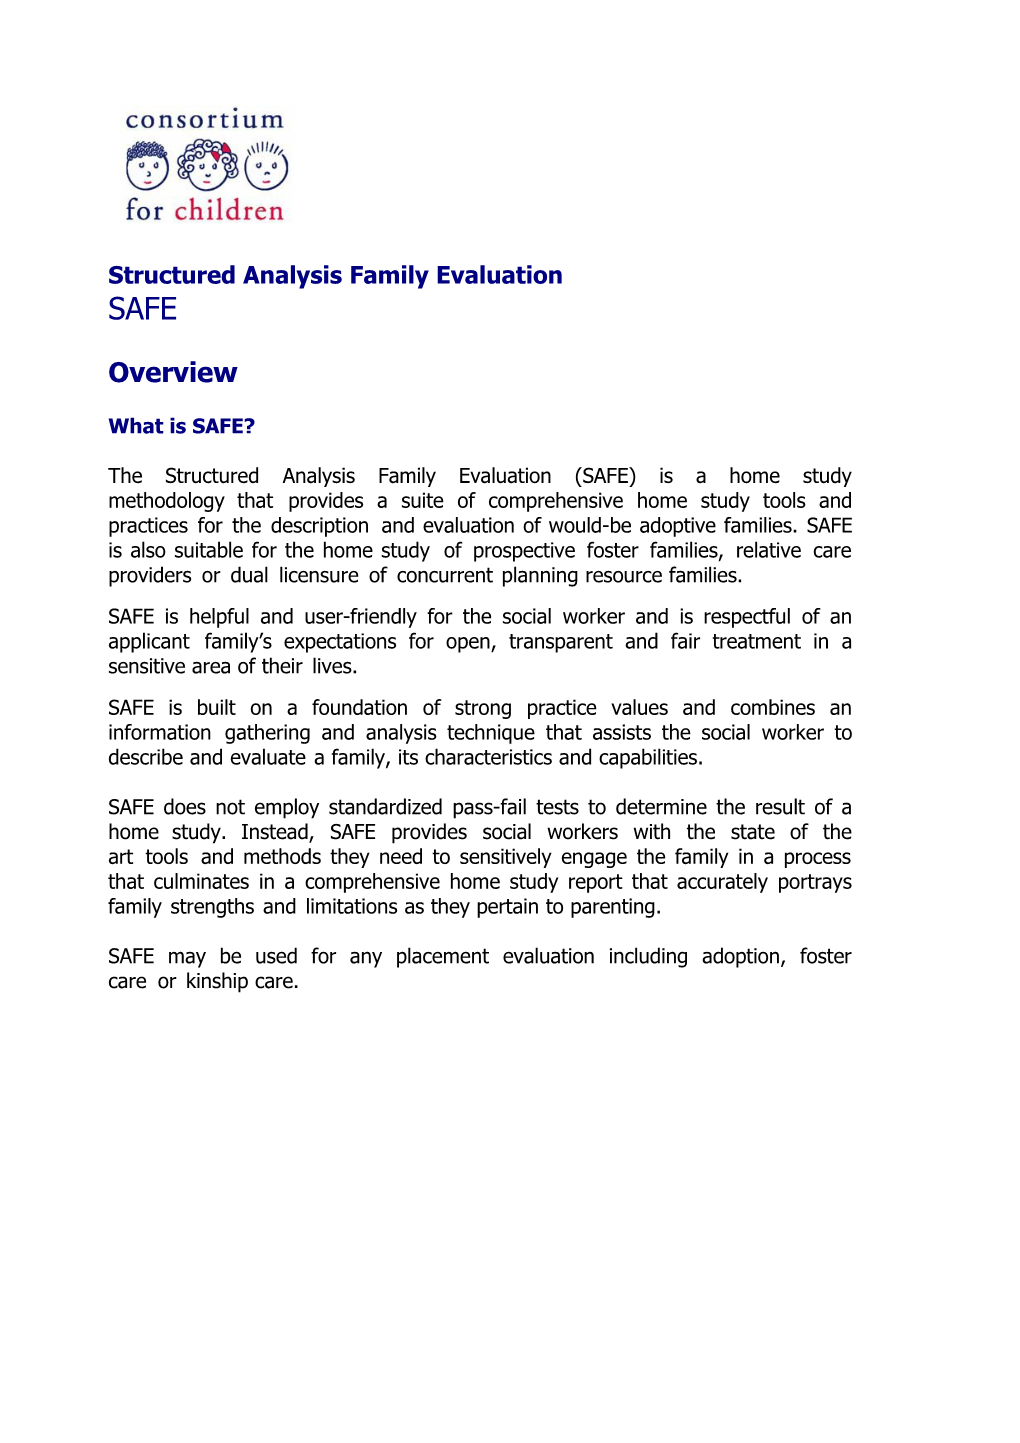 Microsoft Word - Structured Analysis Family Evaluation.DOC